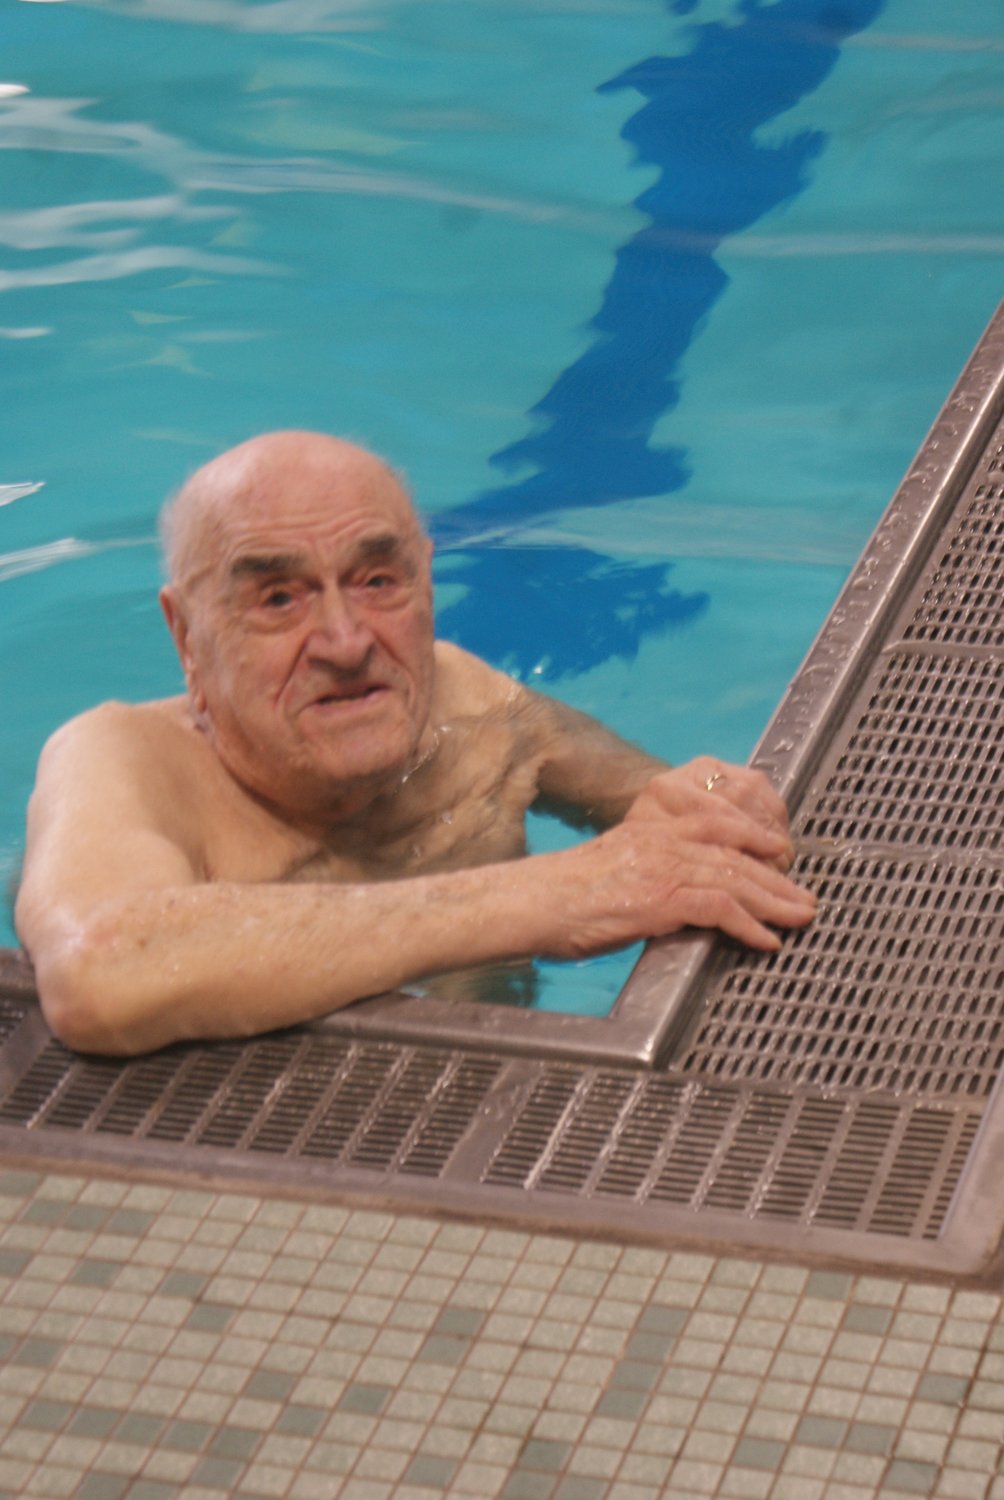 AT EASE: Longtime Cranston YMCA member Frank Mancini, 98, enjoys his time in the pool. He finds it to be a healthy way to exercise, socialize and have fun